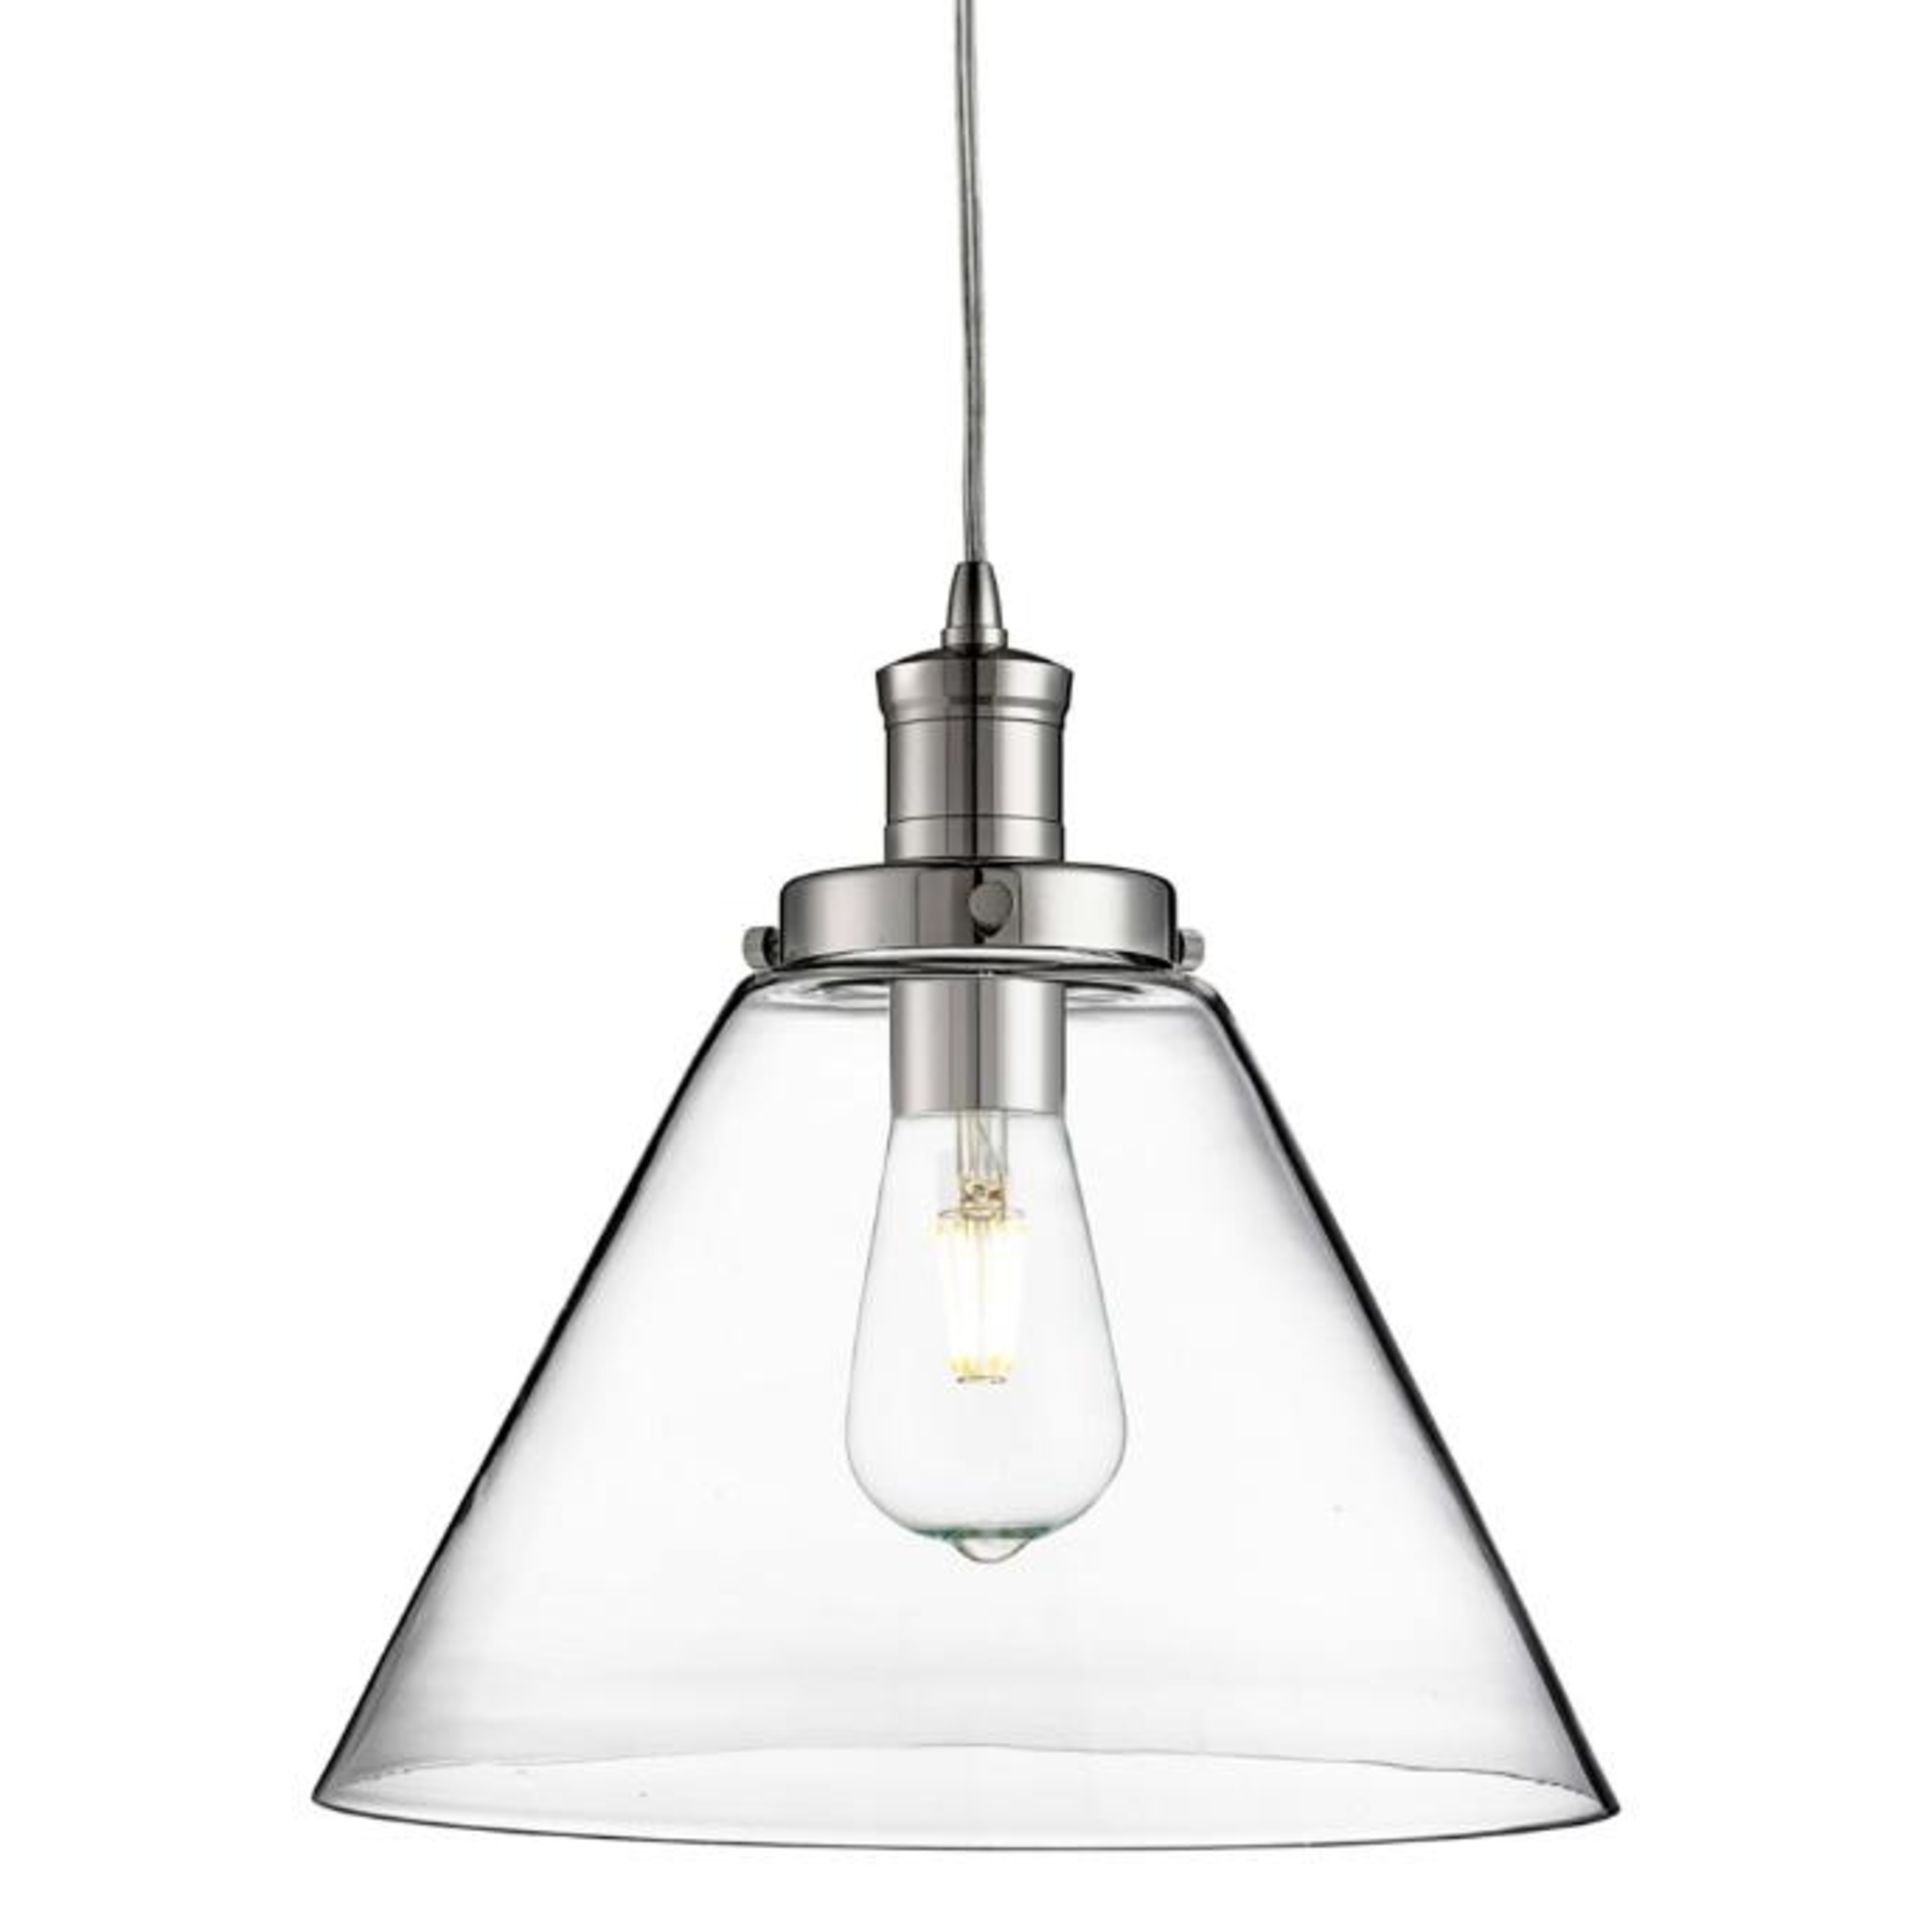 1 x Pyramid Chrome Pendant Light With Clear Glass Shade - Ex Display Stock - CL323 - Ref: 3228CC/PAL